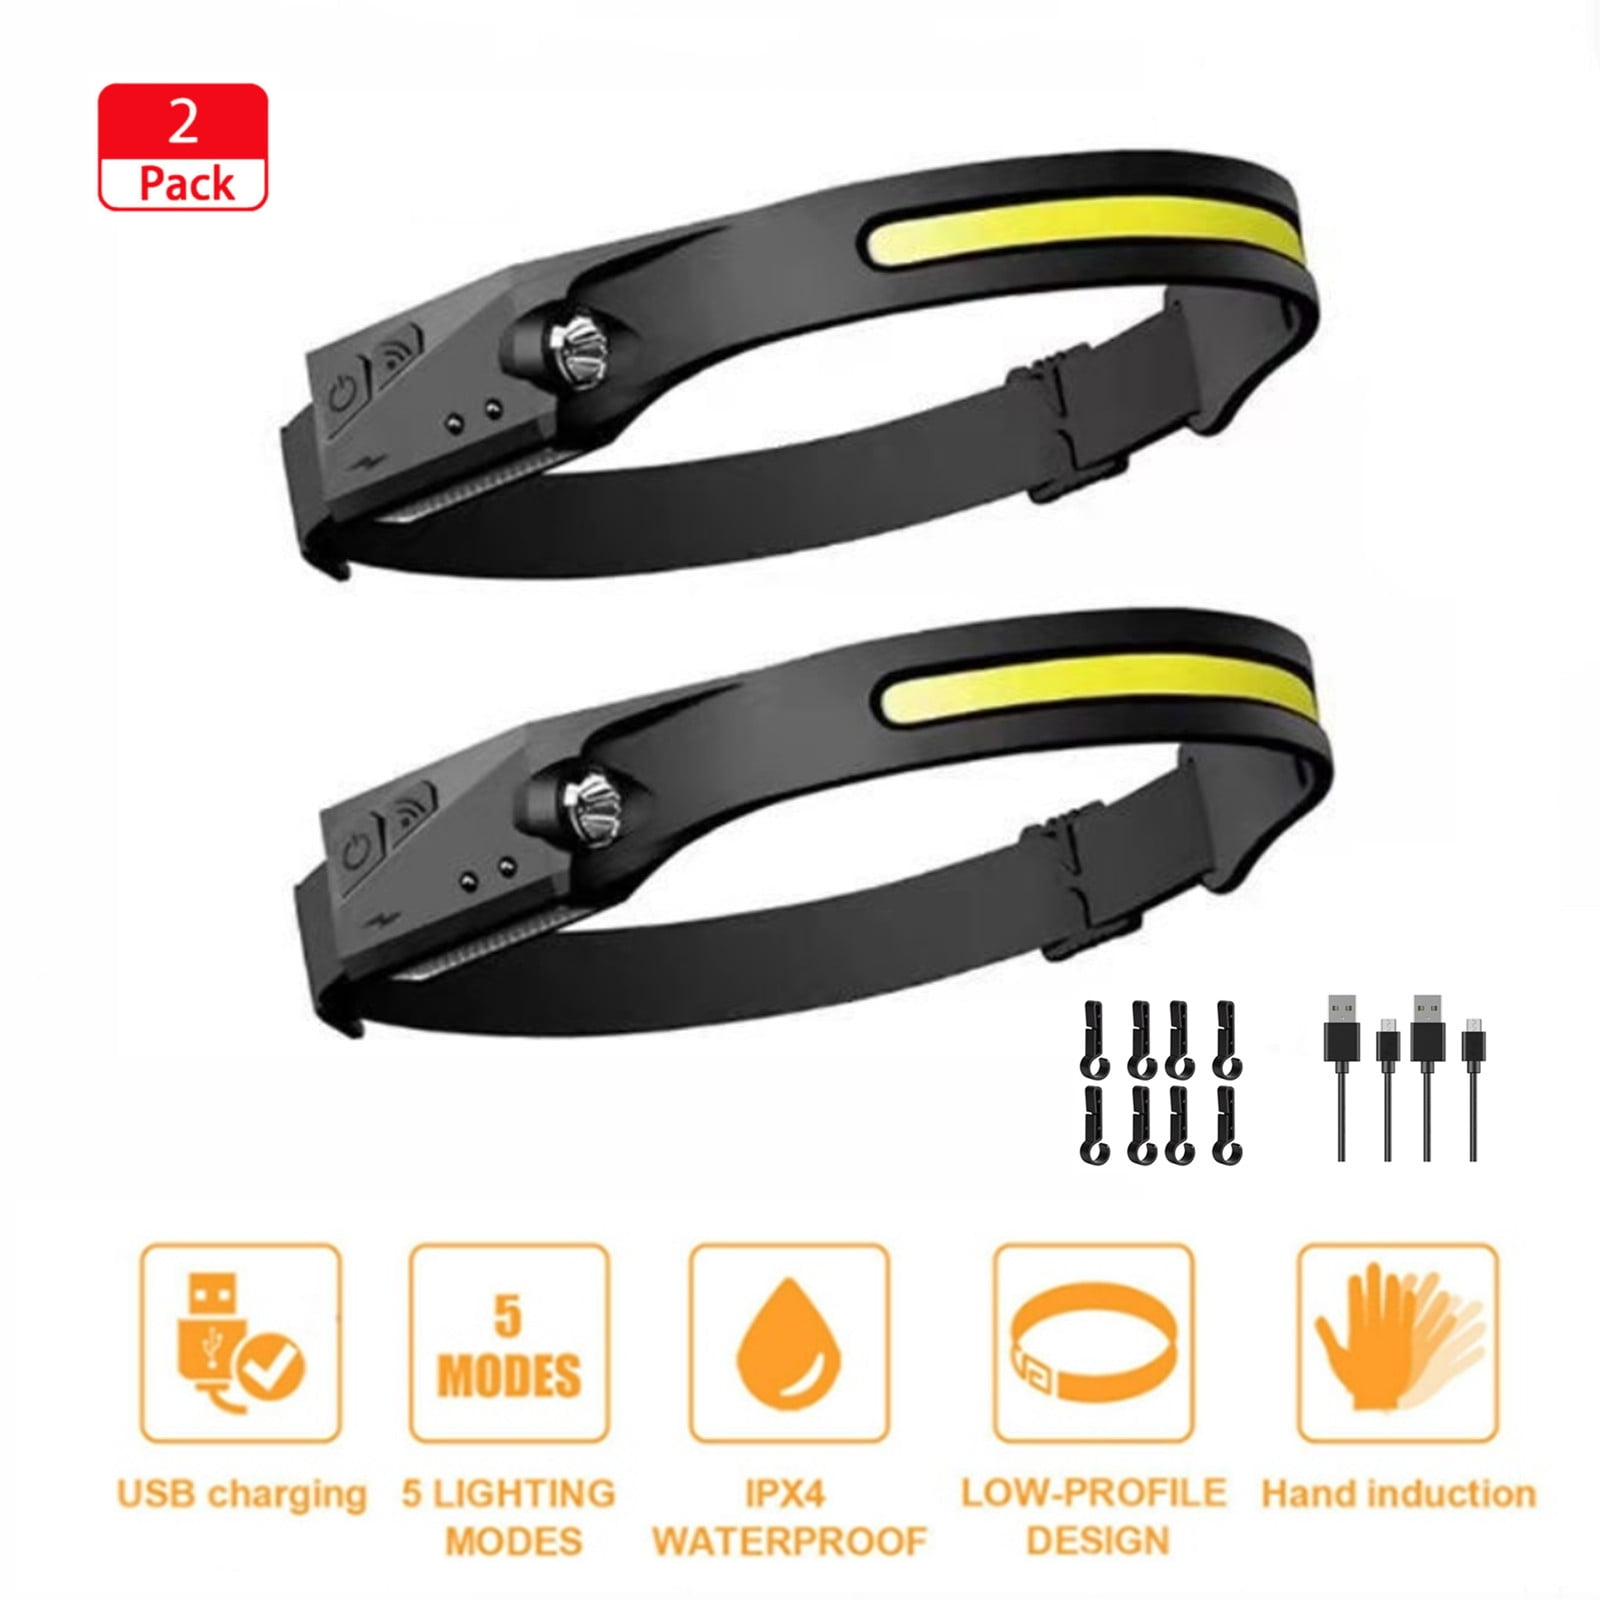 LED Headlamp Rechargeable Pack, 230° Wide Beam Headlight with Motion  Sensor, Modes Waterproof Head Lamp with Clips